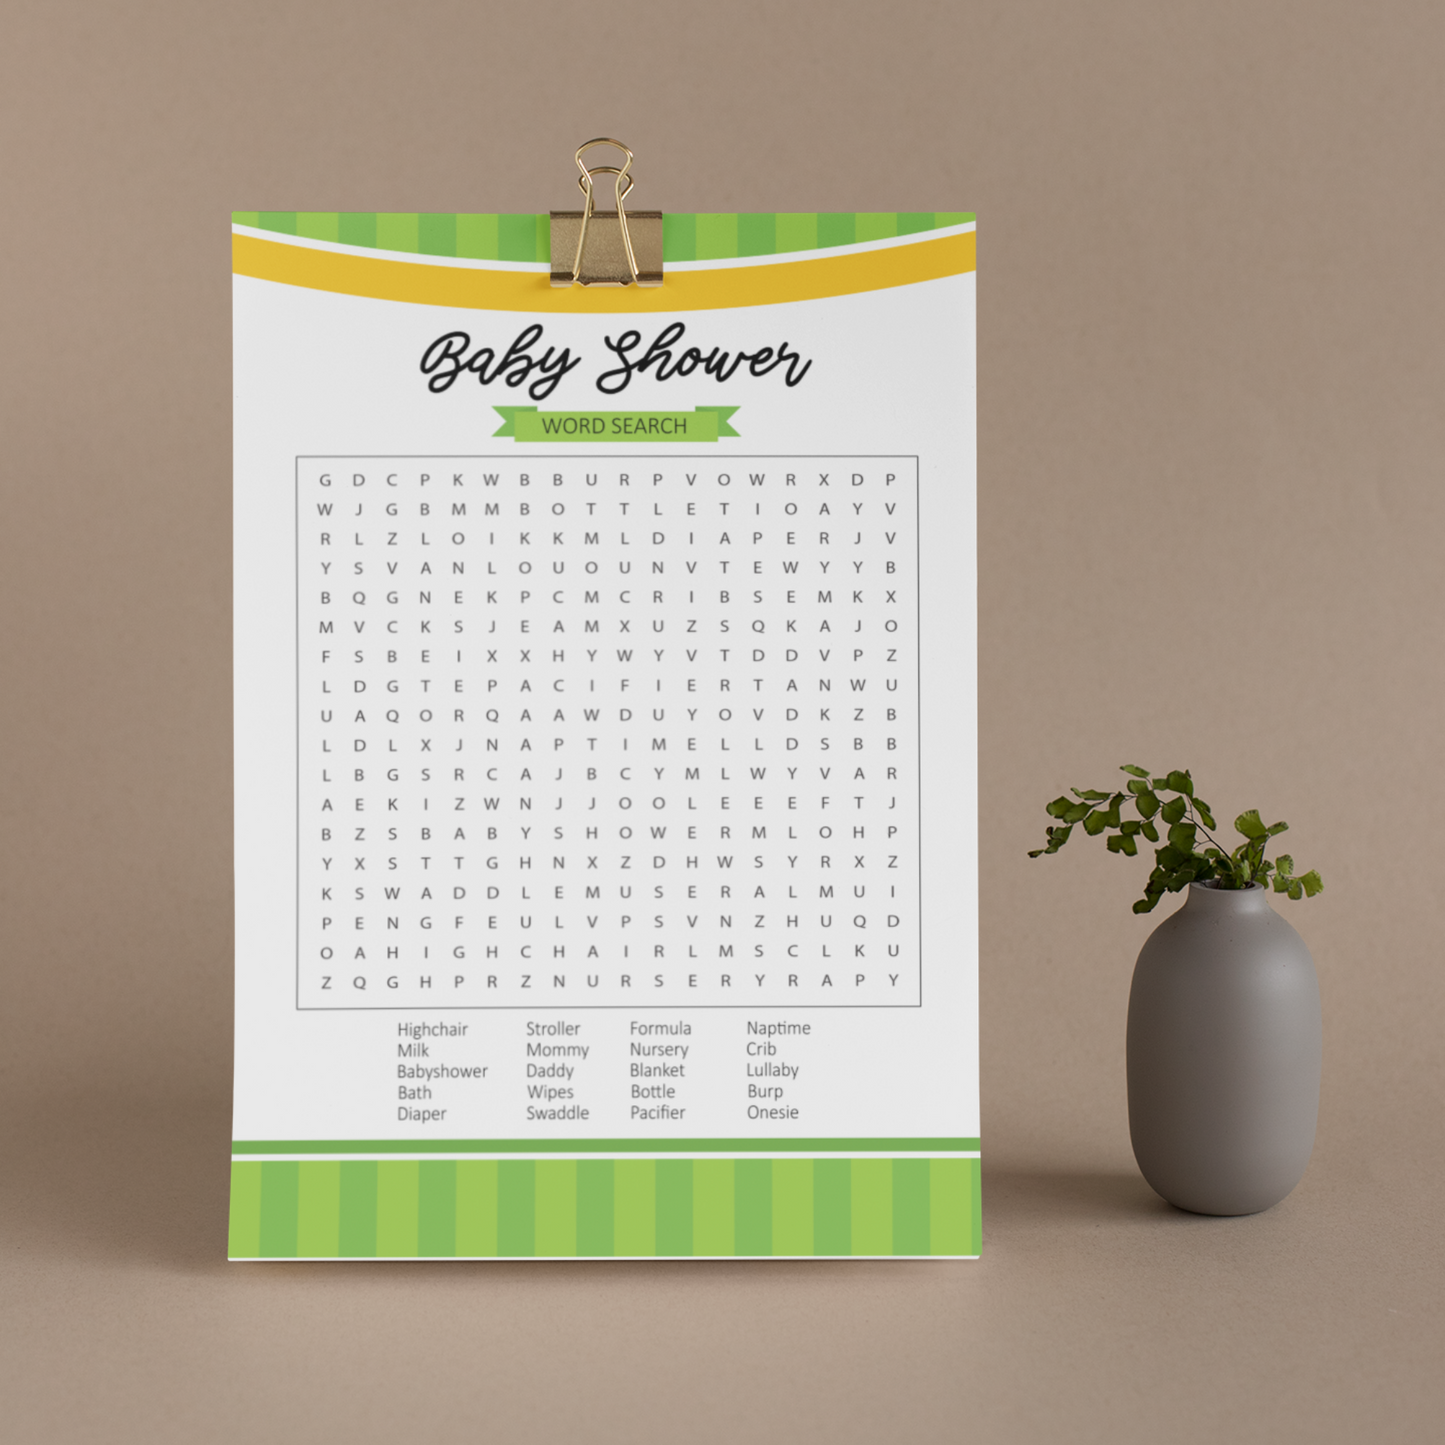 Word Search Game for Baby Shower Printable - Green - Droo & Aya